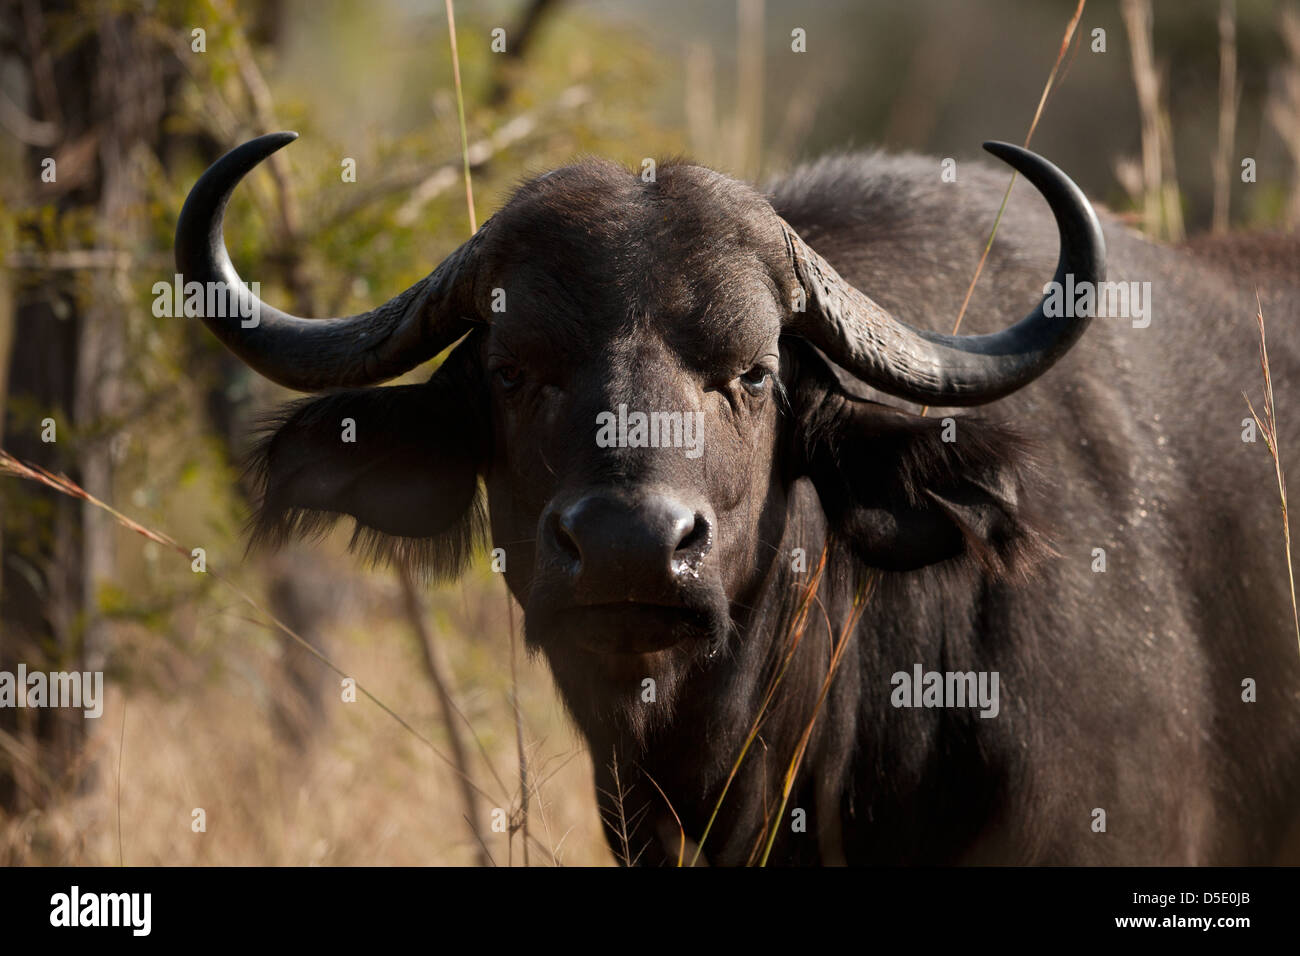 An African or Cape Buffalo (Syncerus caffer) Stock Photo